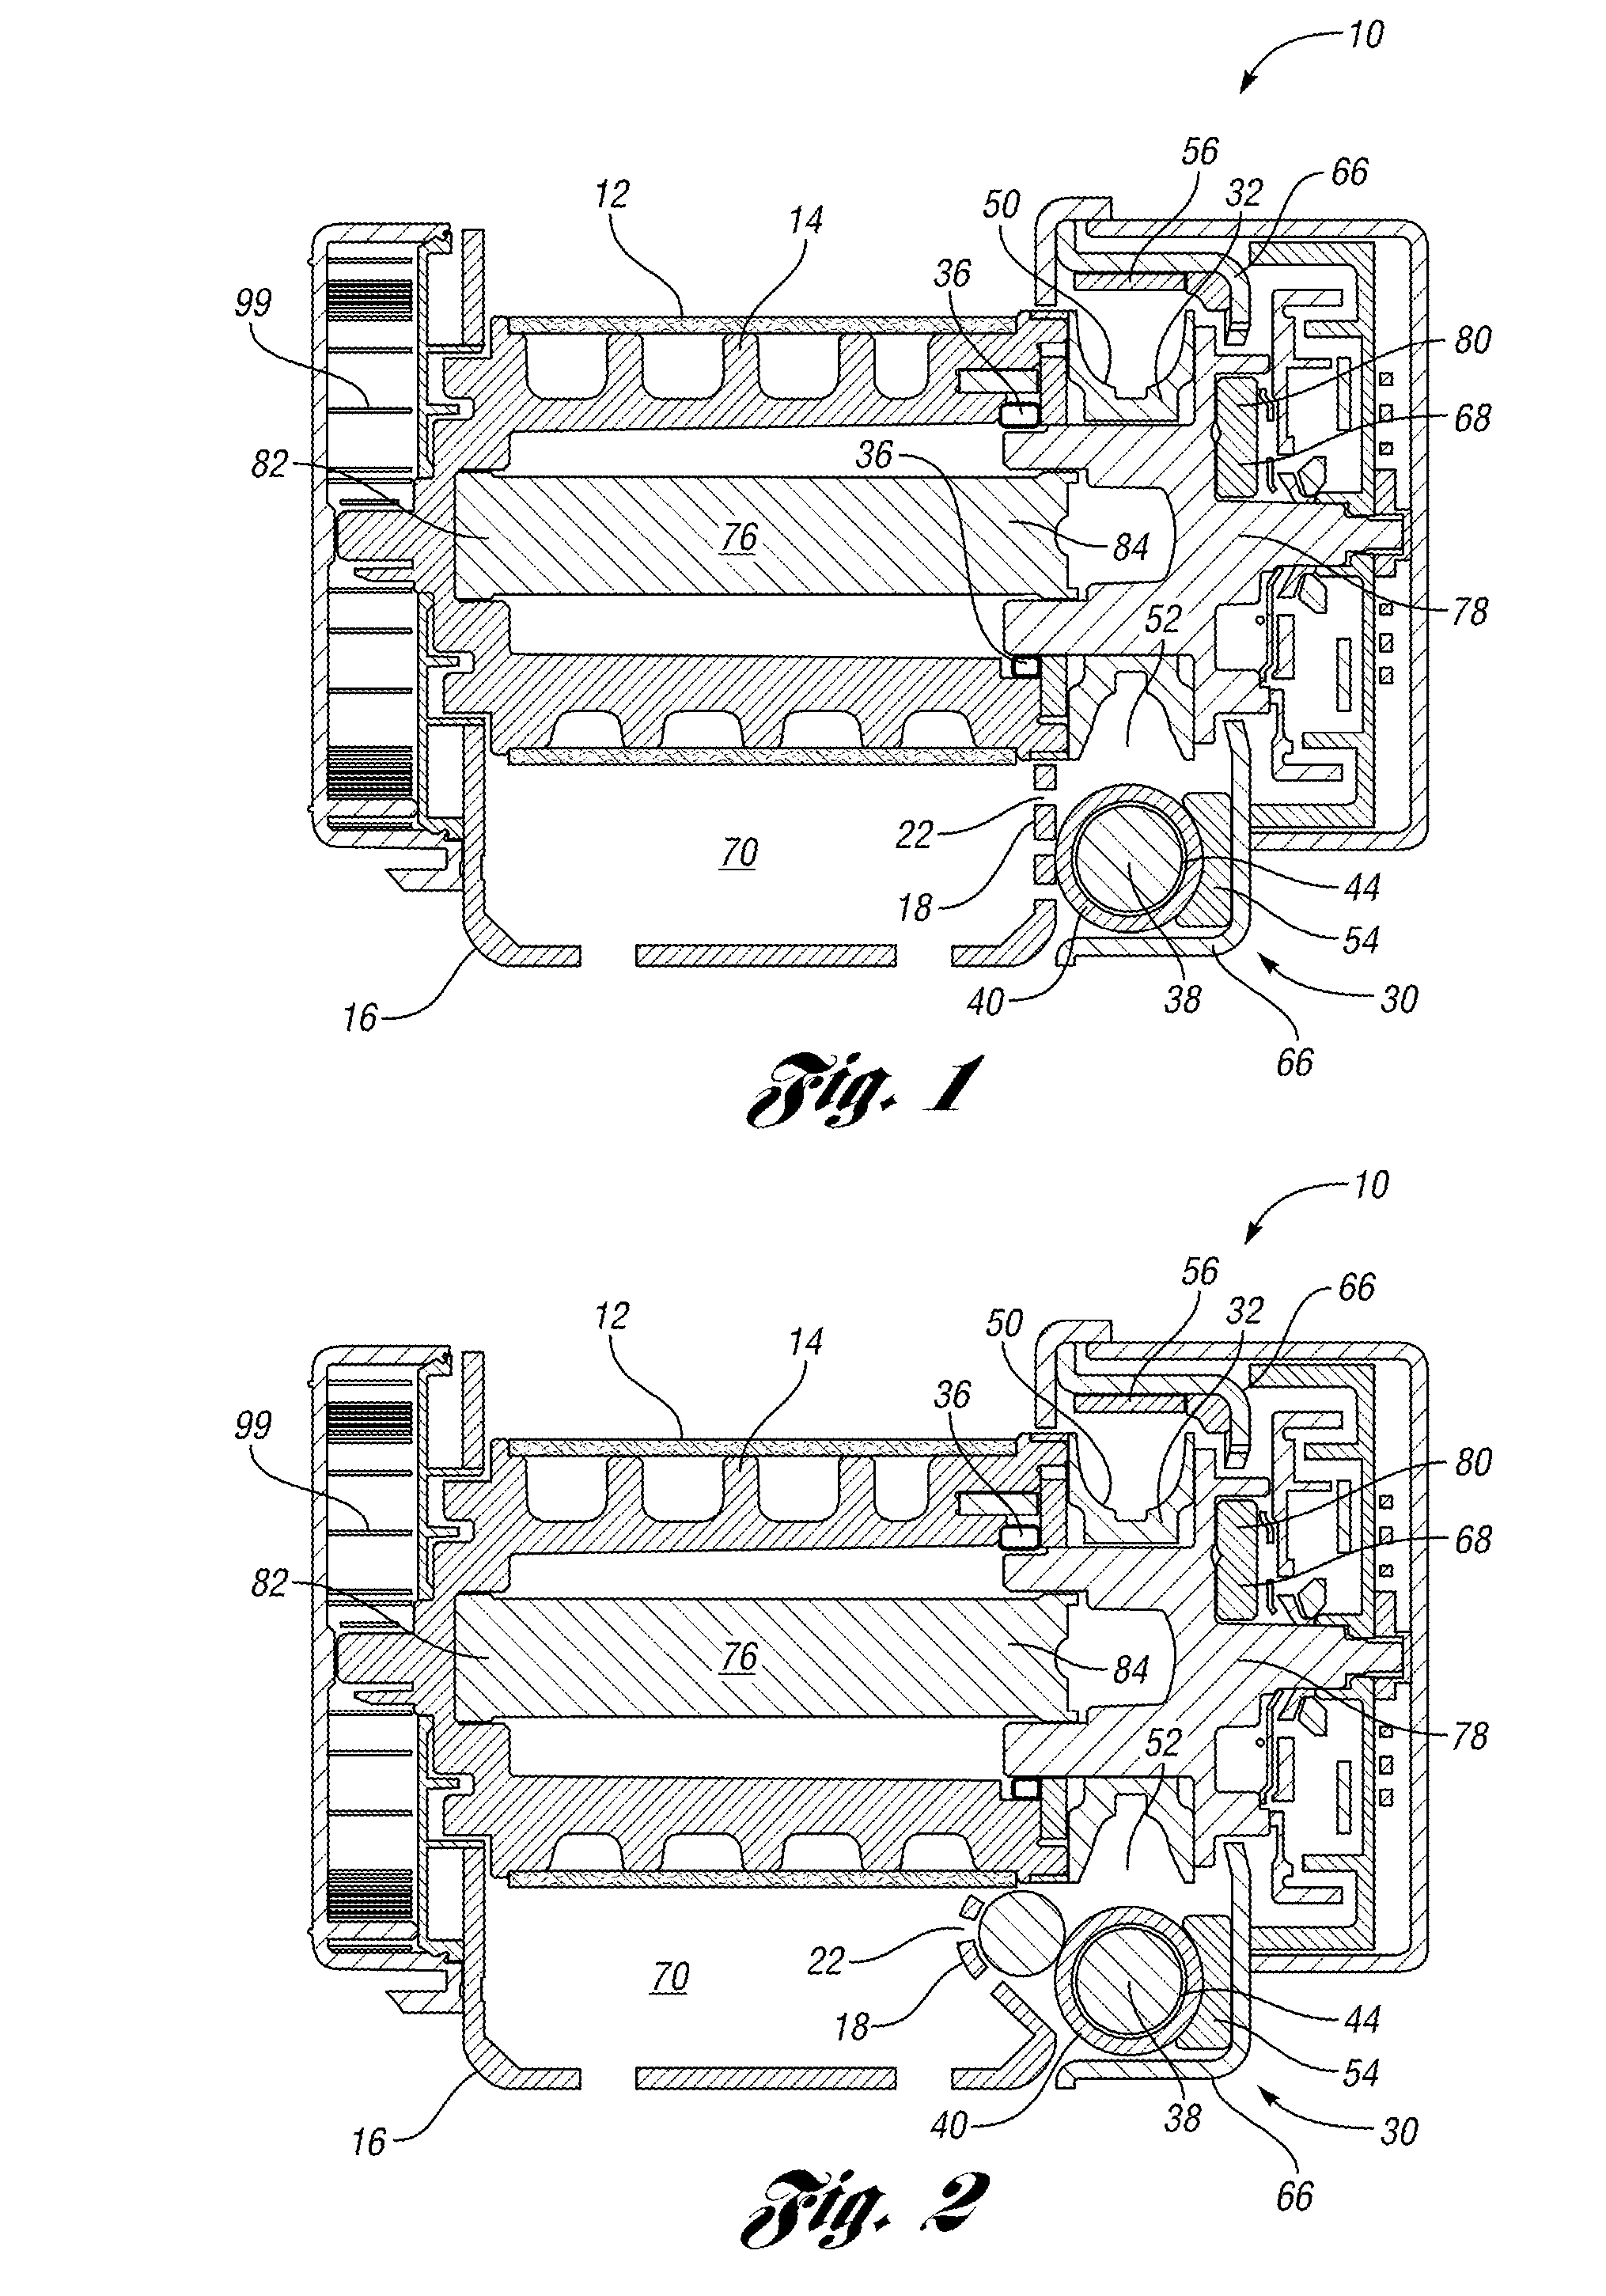 Device for pretensioning a seatbelt